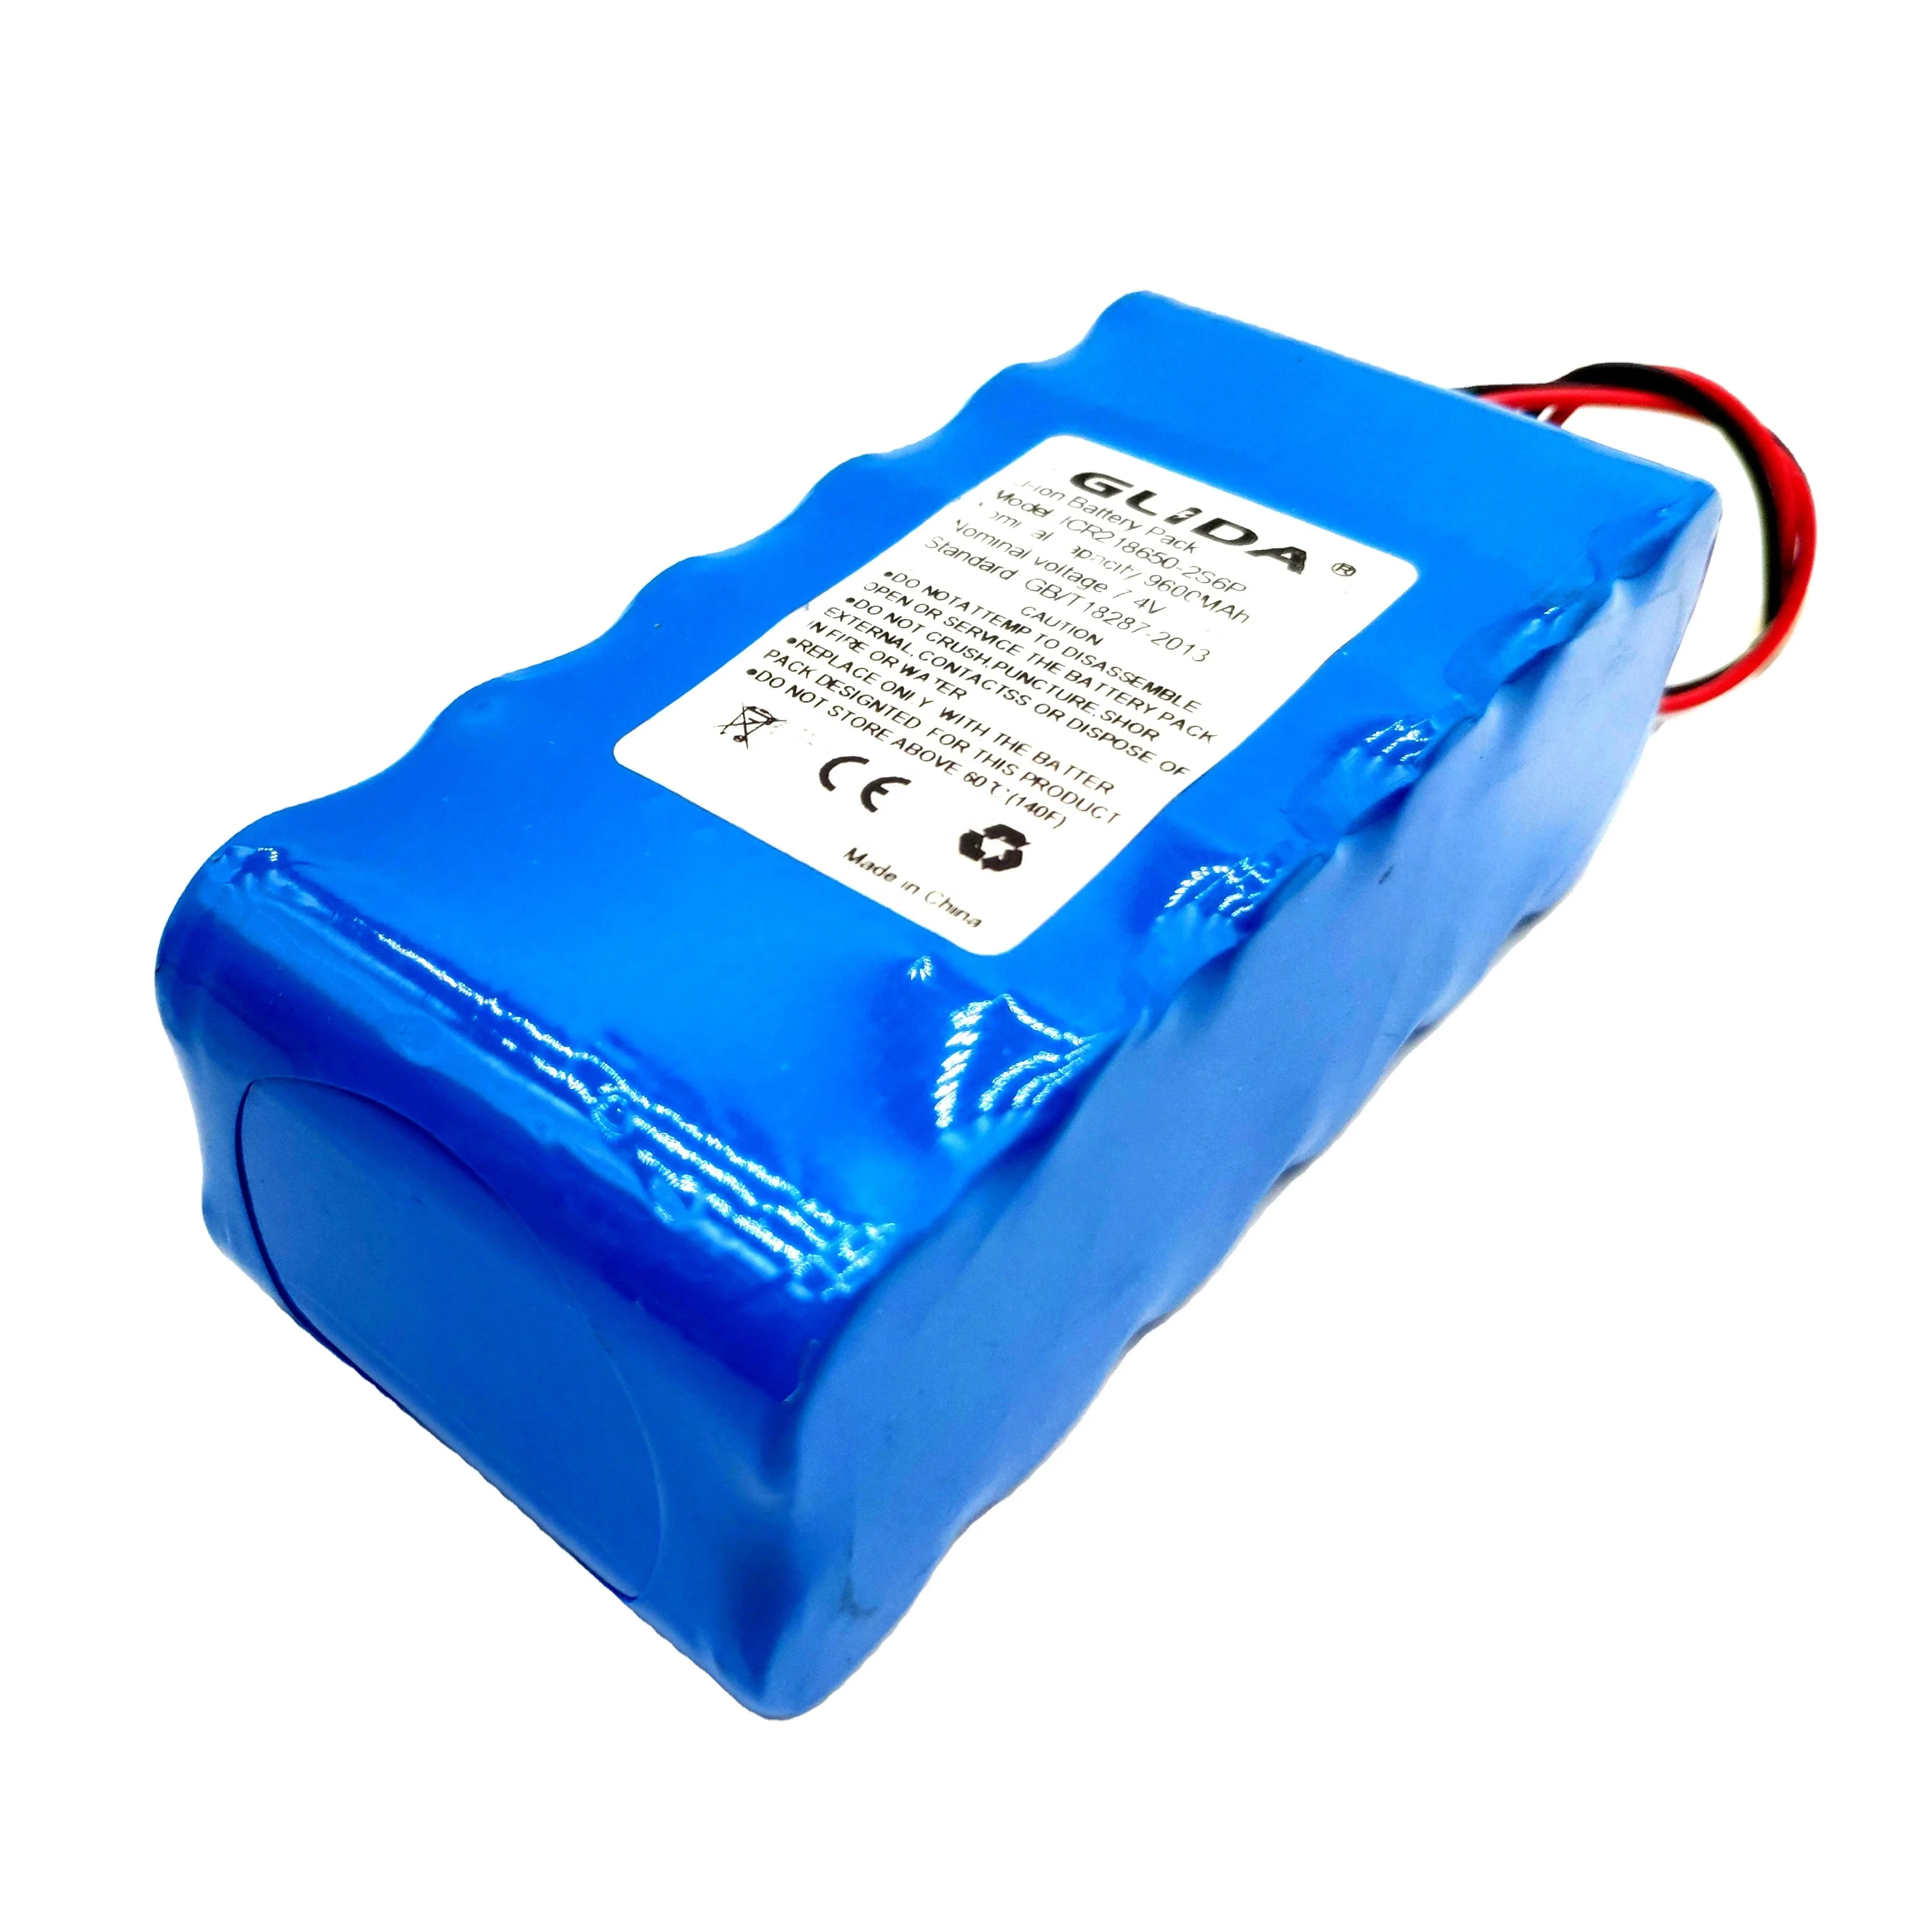 ICR18650-2S6P 7.4V 9600mAh Lithium ion battery pack Rechargeable